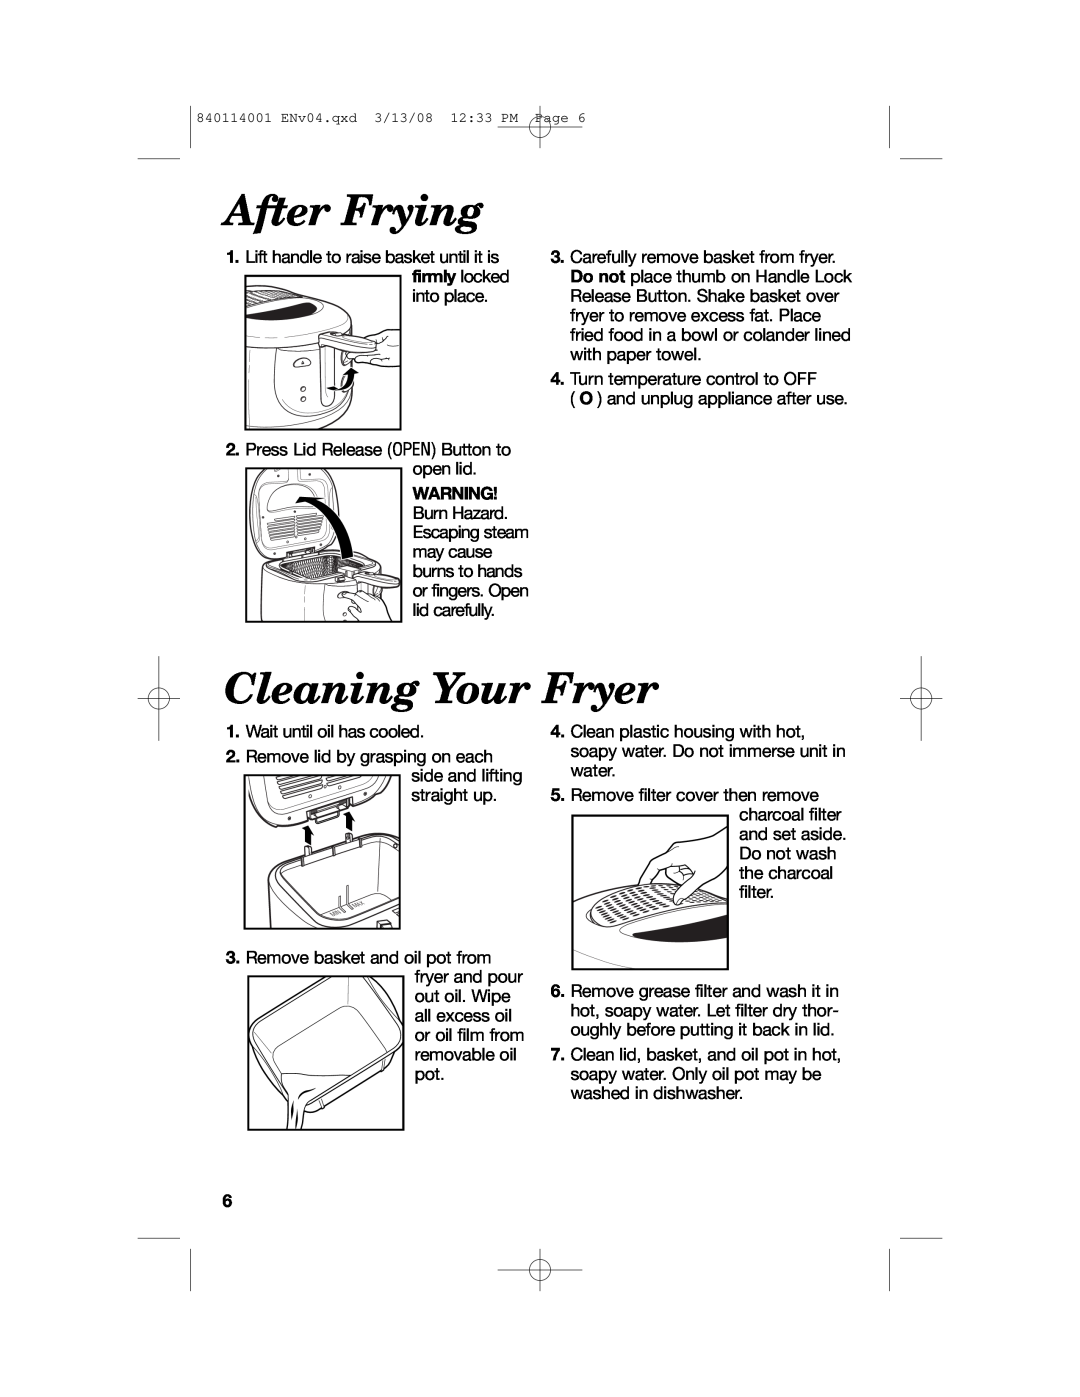 Hamilton Beach 840114001 manual After Frying, Cleaning Your Fryer 